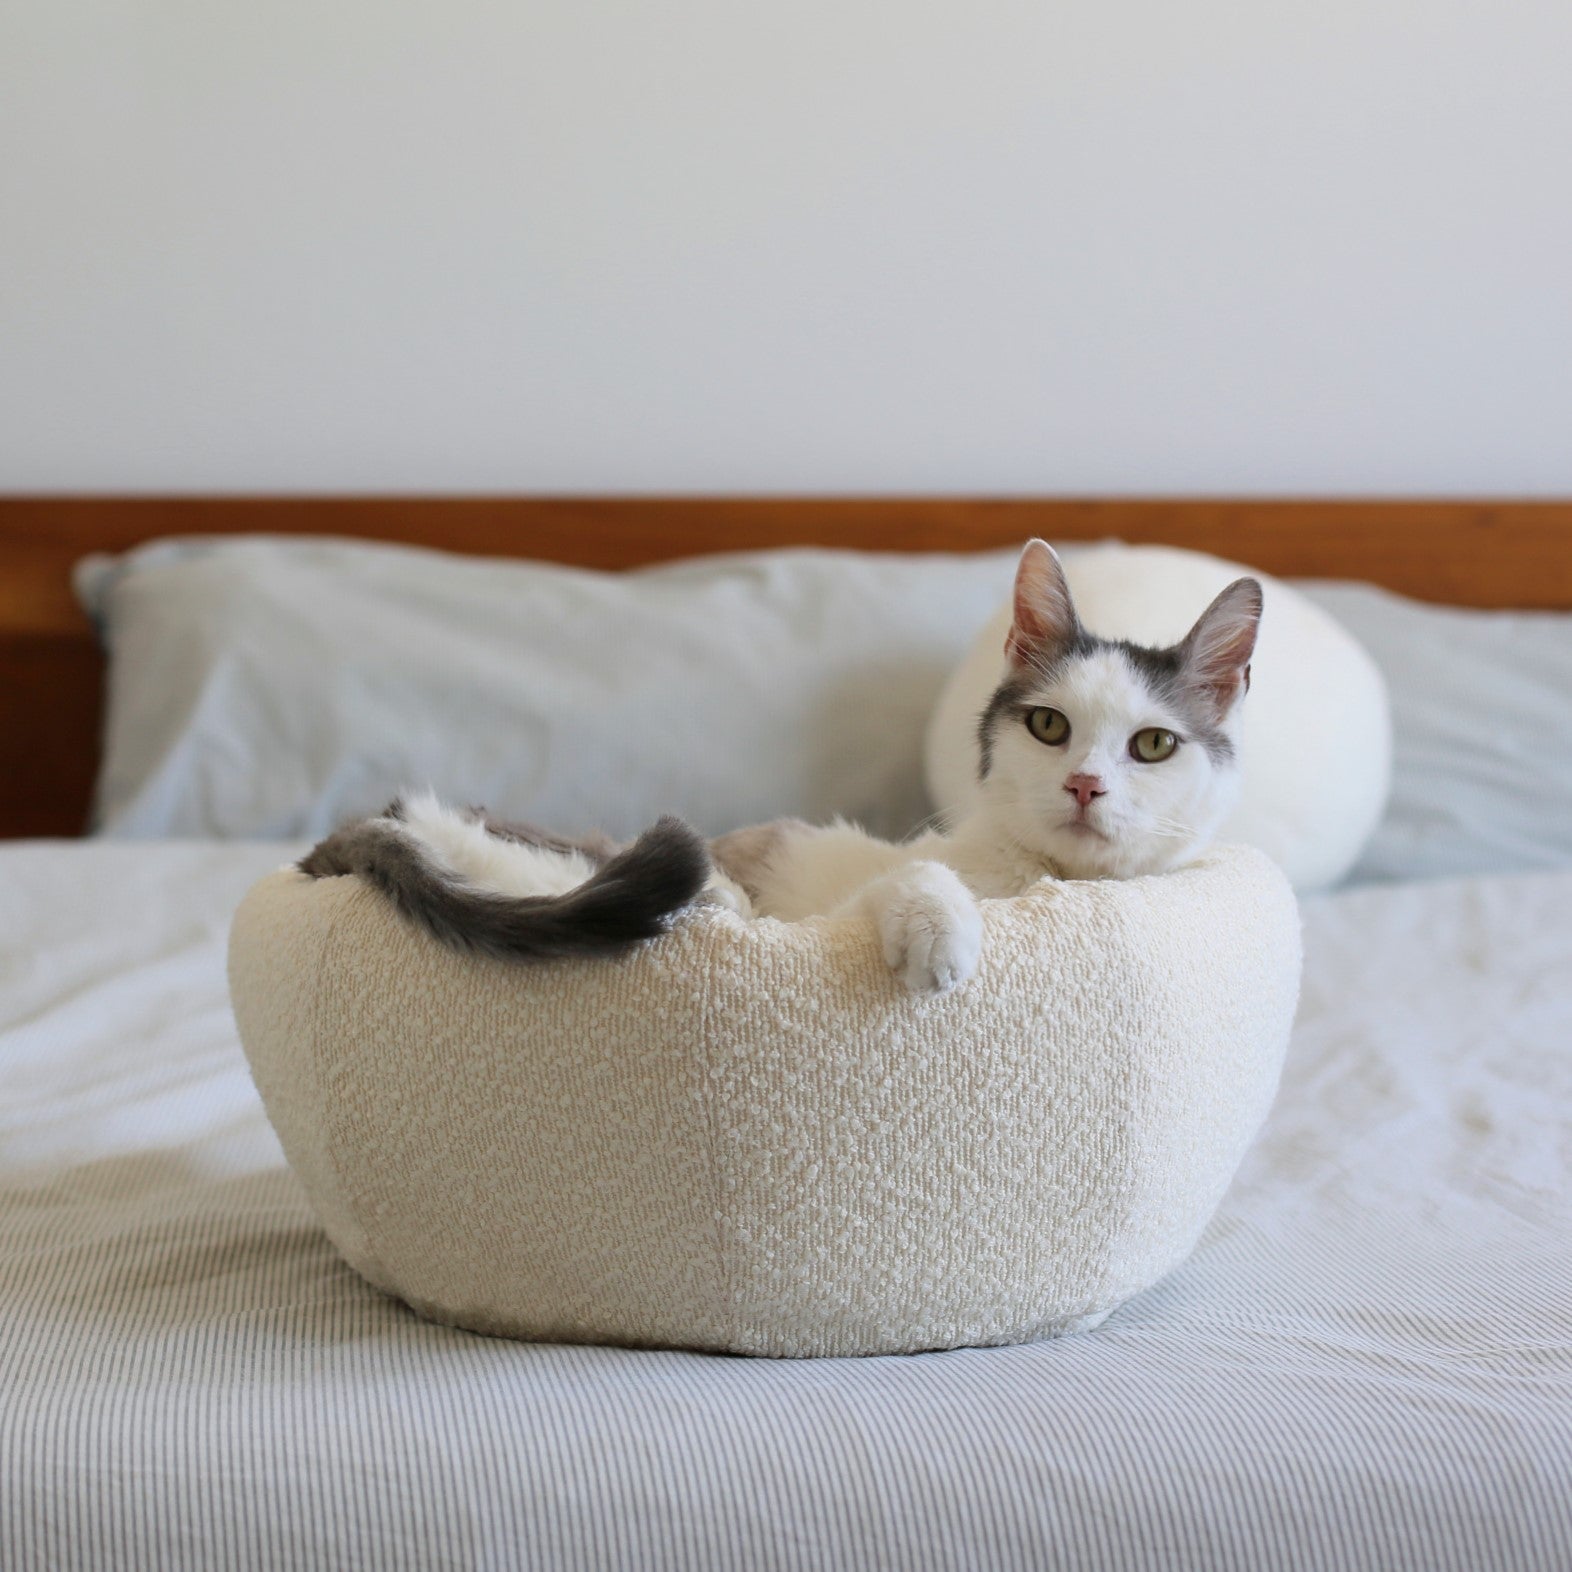 modern warm cat bed and cat nest on bed with grey and white cat in modern and aesthetic bedroom home is like a cat igloo, cat nest and cat hideaway all in one